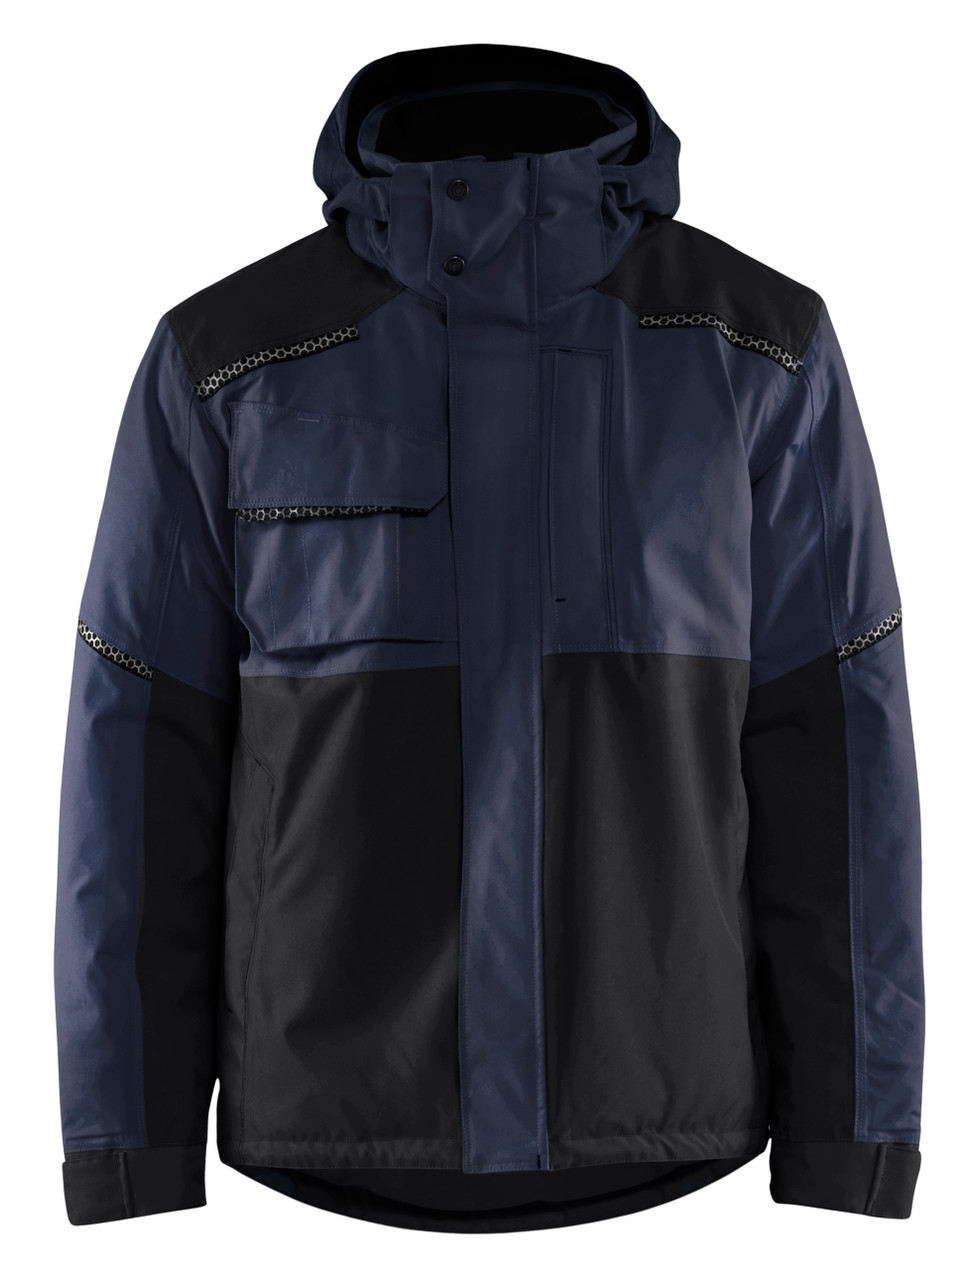 BLAKLADER Polyester Waterproof Dark Navy Blue  Jacket  for Electricians that have Full Zip  available in Australia and New Zealand